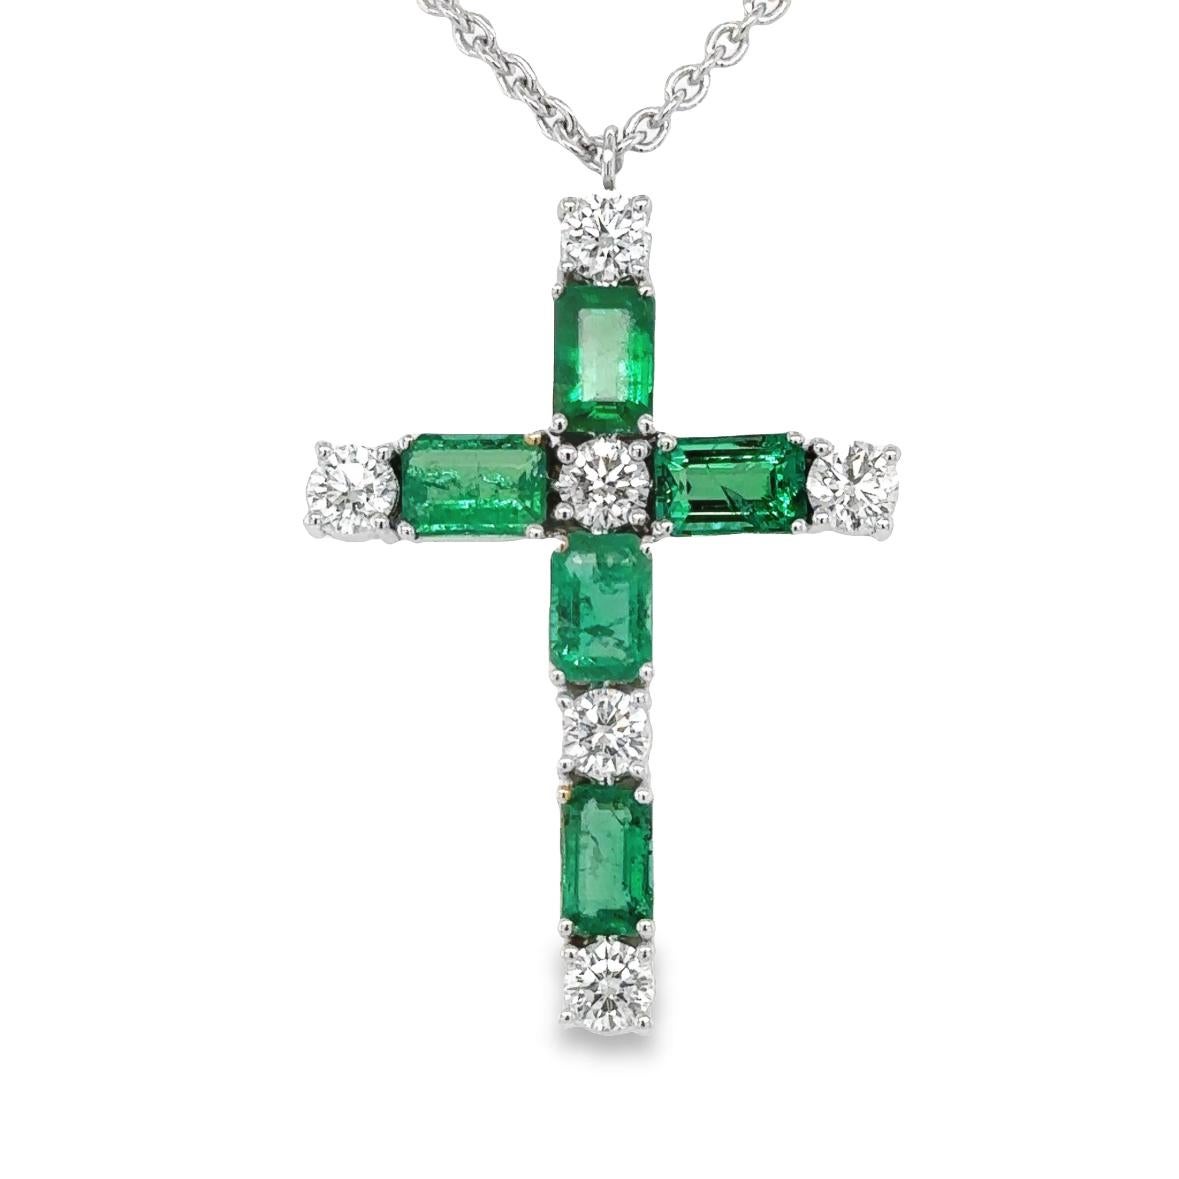 TIMELESS Necklace Cross in white gold 18Kt 9.50 gr with 5 Emerald Cut Green Emerald in total 2.24 ct and 6 Round Diamonds G Color VS Clarity in total 1.05 ct

The Timeless Collection was inspired by the endless elegance and sophistication of classic